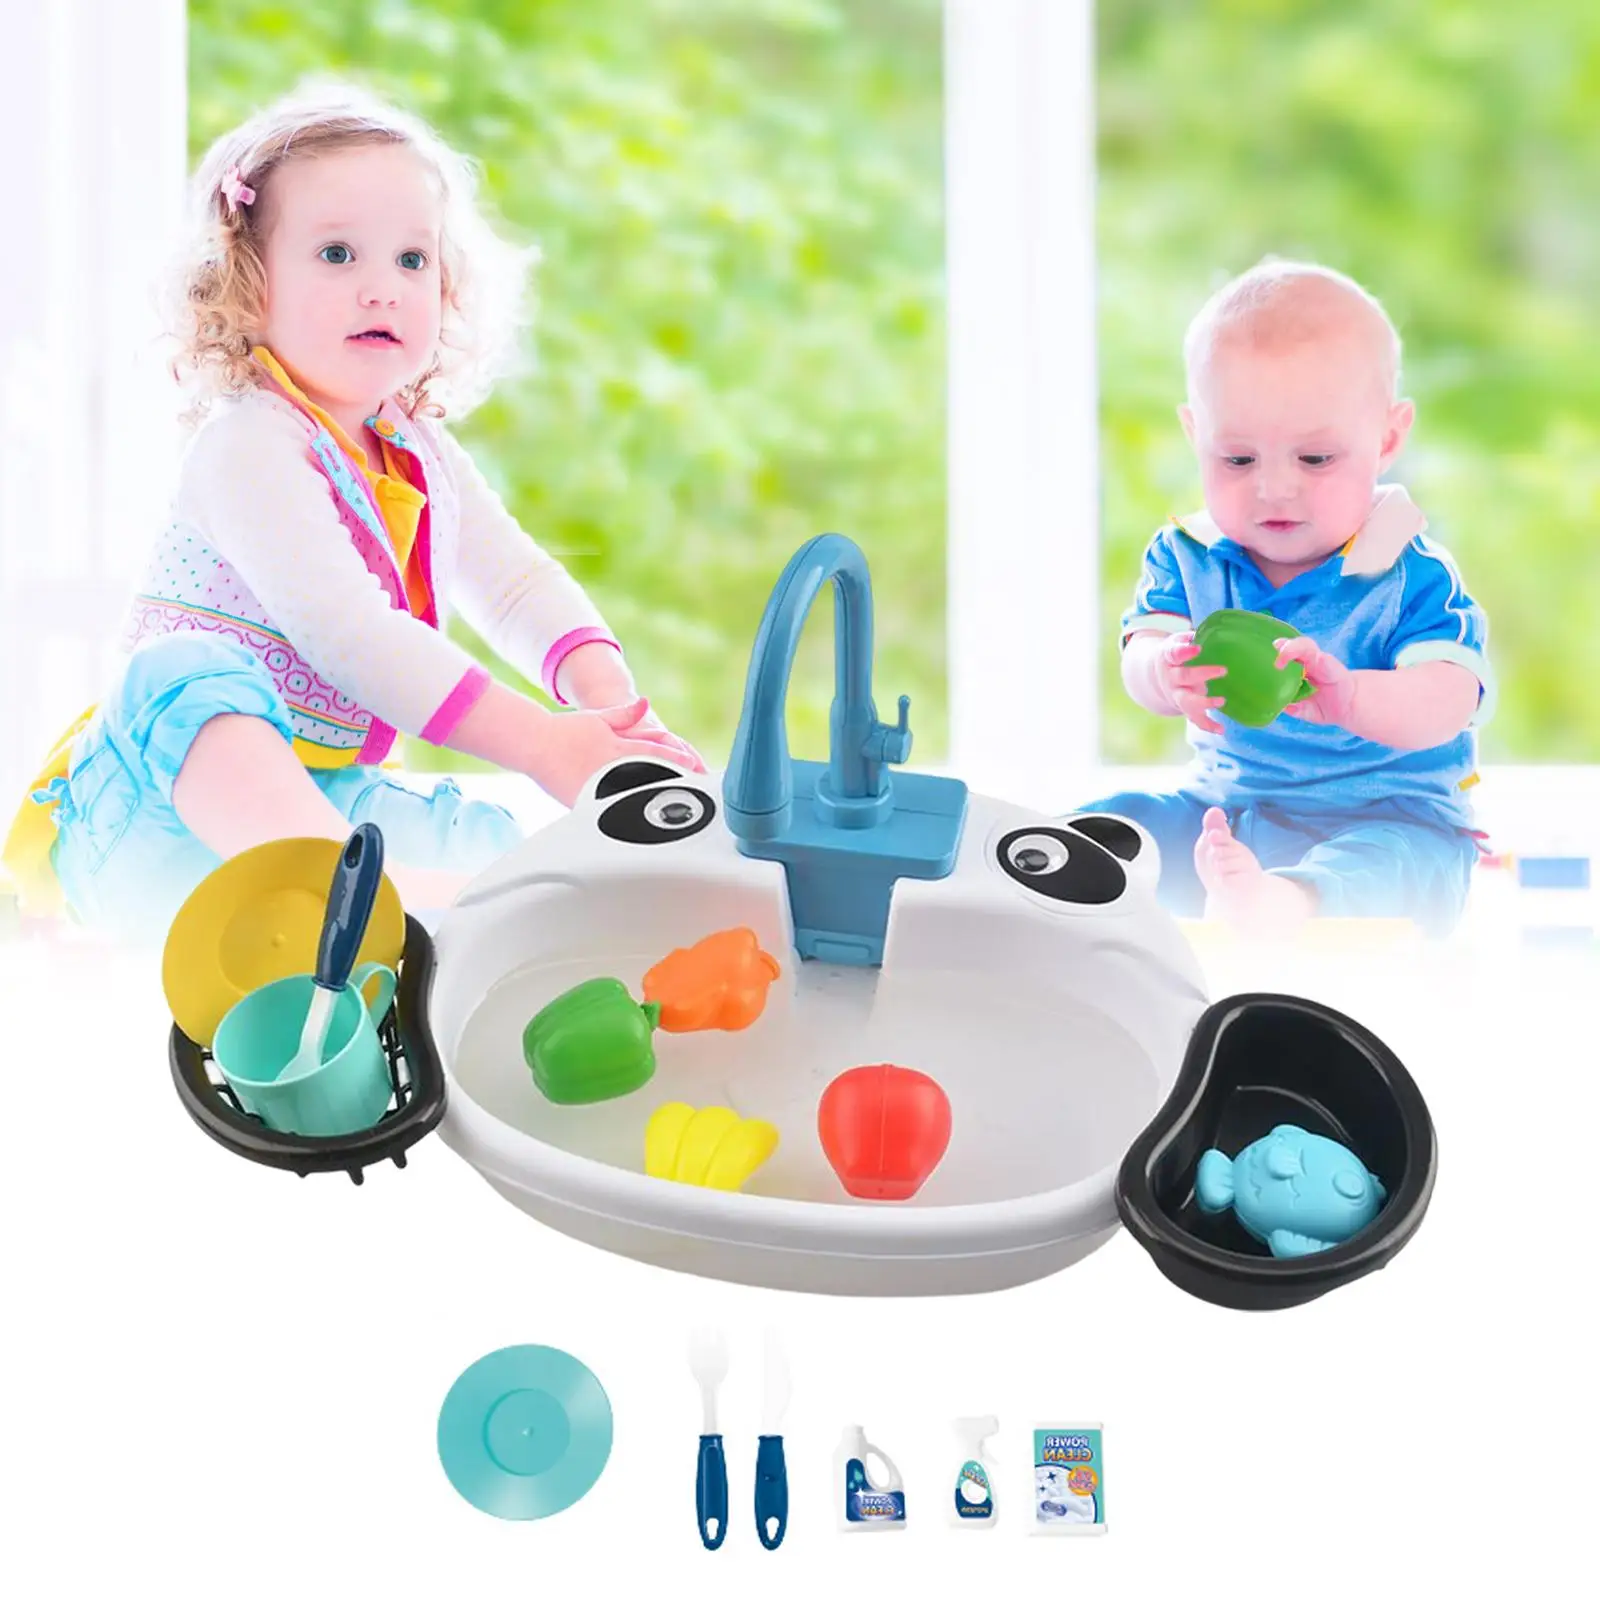 Pretend Play Sink Toys, with Running Water Simulated Sink Dishwashing Set  for Boys and Girls Kids Toddlers Children Birthday